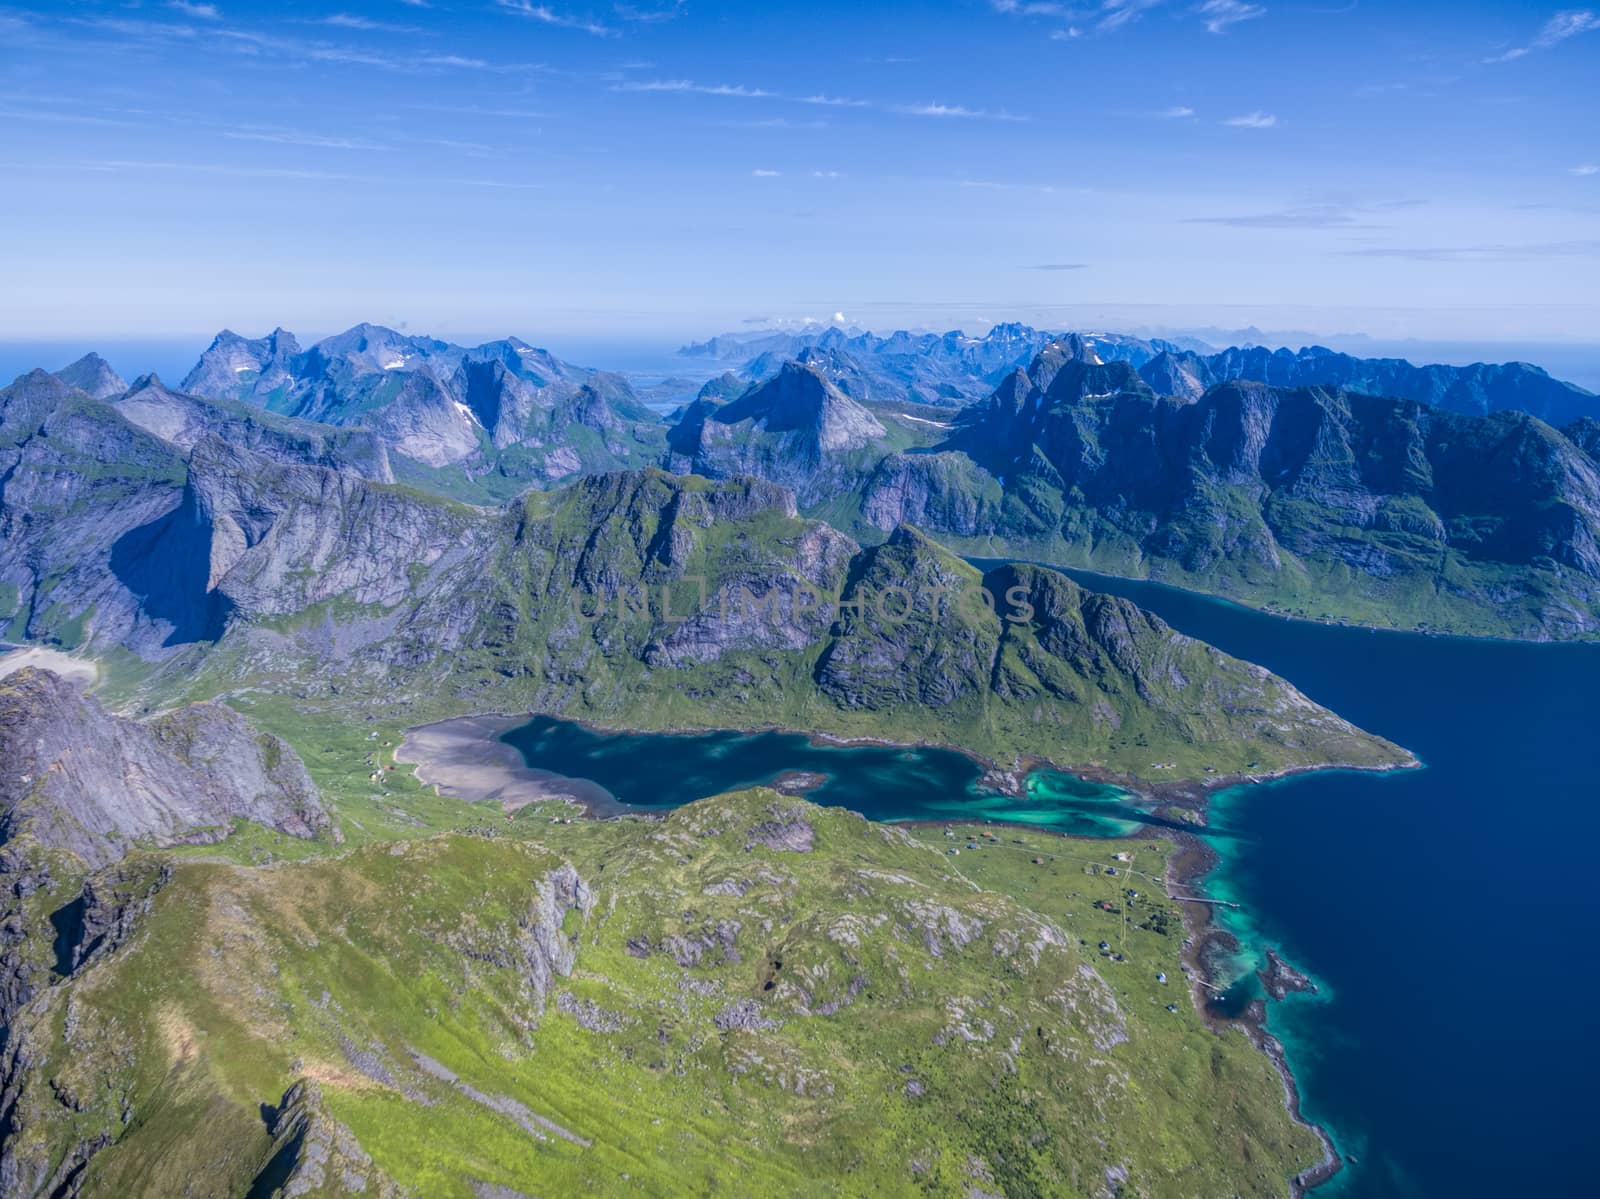 Lofoten islands in Norway, famous for natural beauty, aerial view